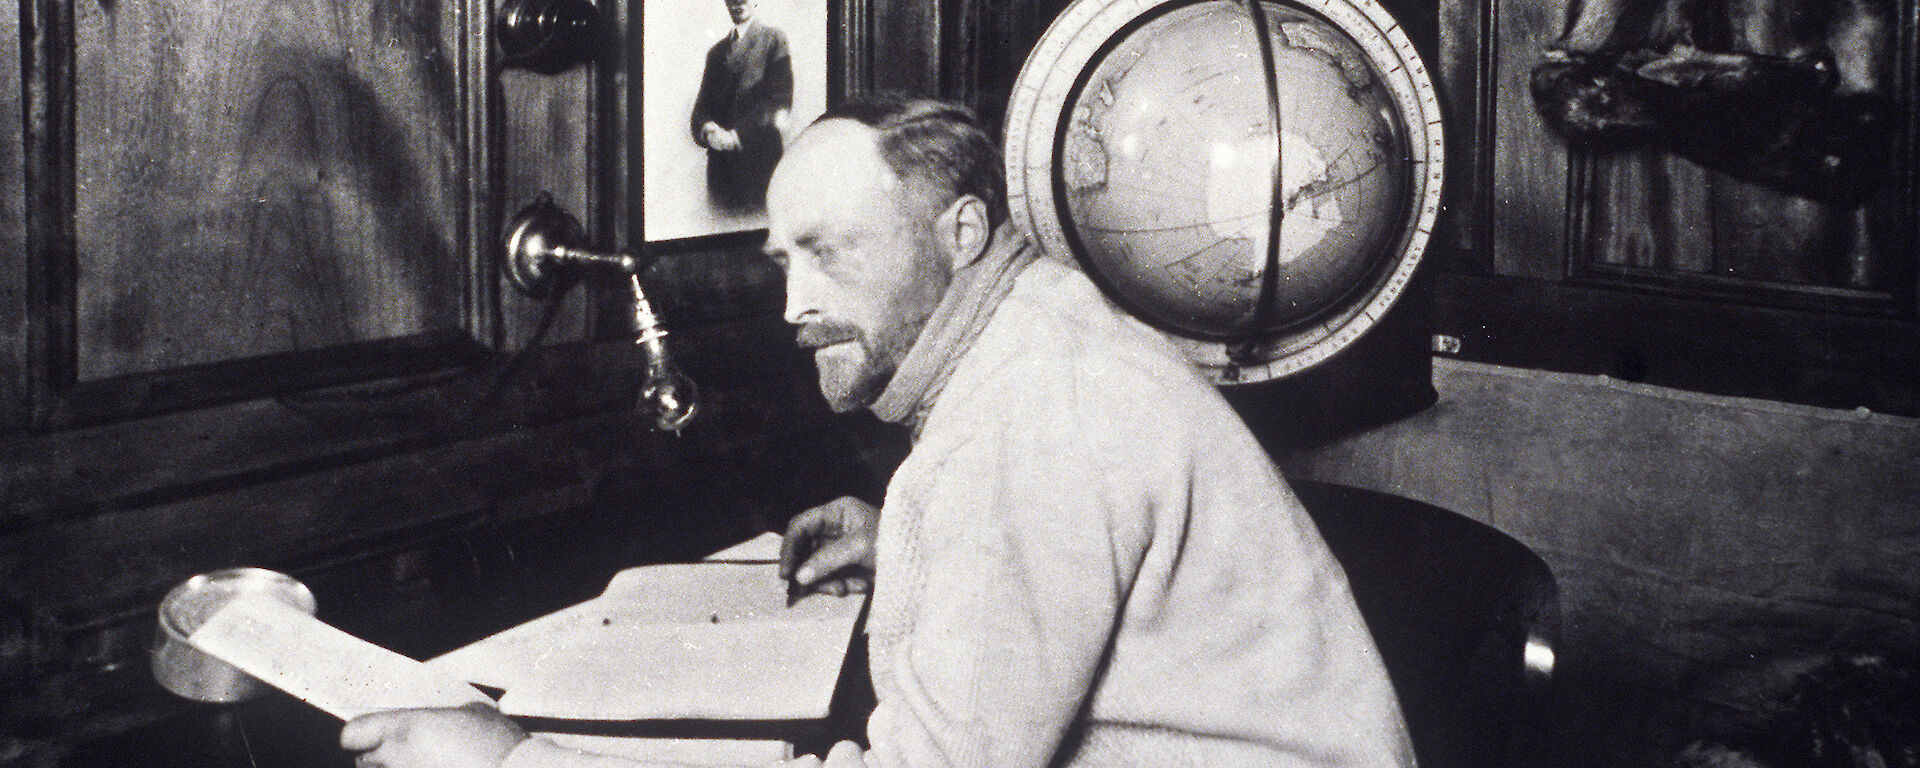 Sir Douglas Mawson in the Commander’s Cabin, Discovery